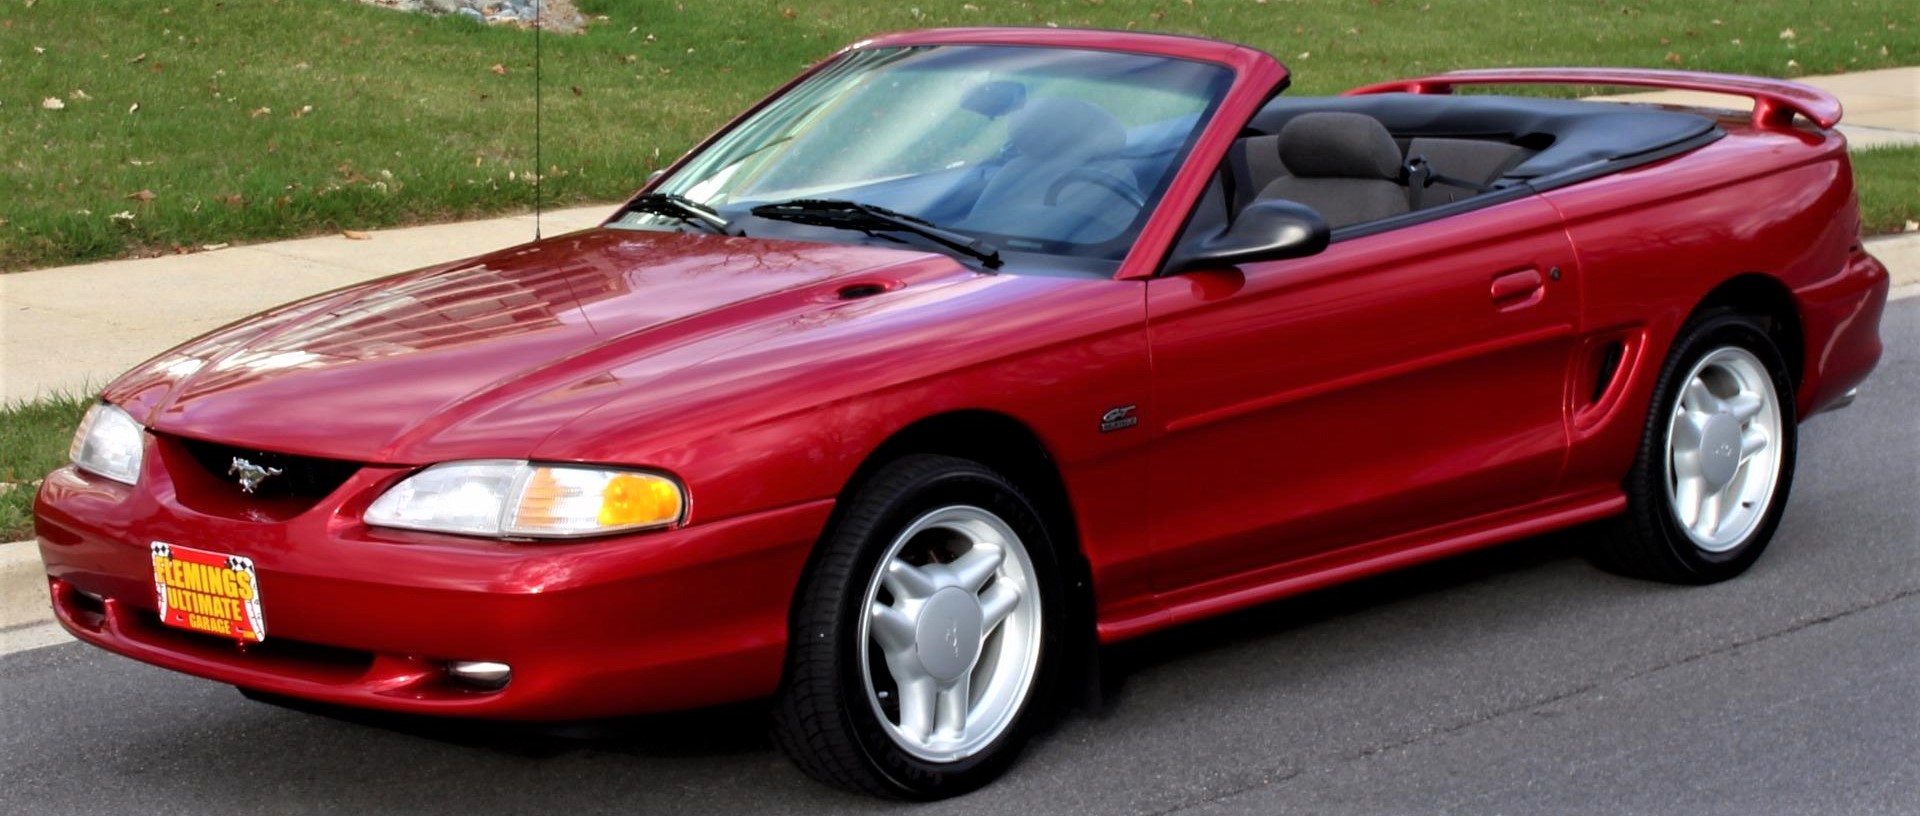 Best SN95 & New Edge Mustang Colors | 1994-04 - Best SN95 & New Edge Mustang Colors | 1994-04